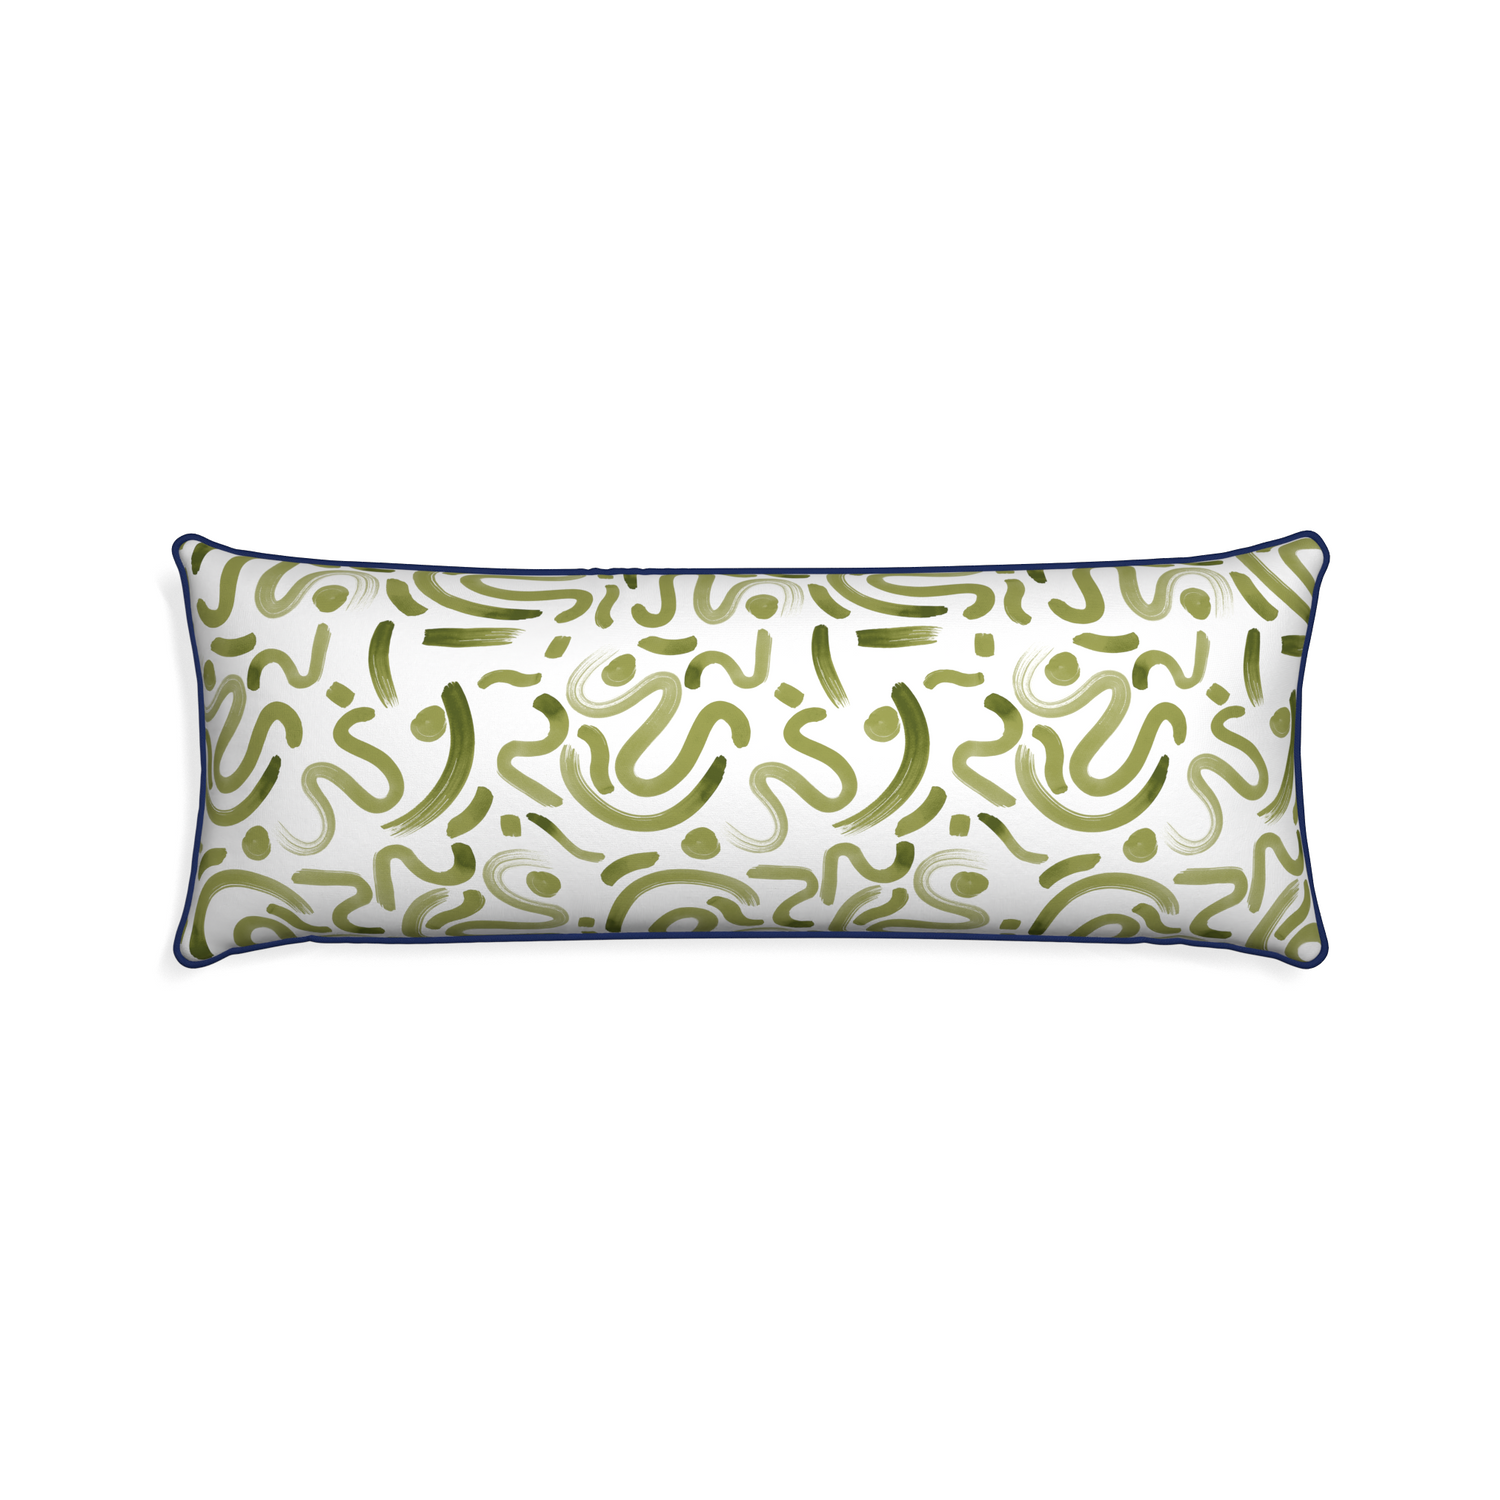 Xl-lumbar hockney moss custom moss greenpillow with midnight piping on white background